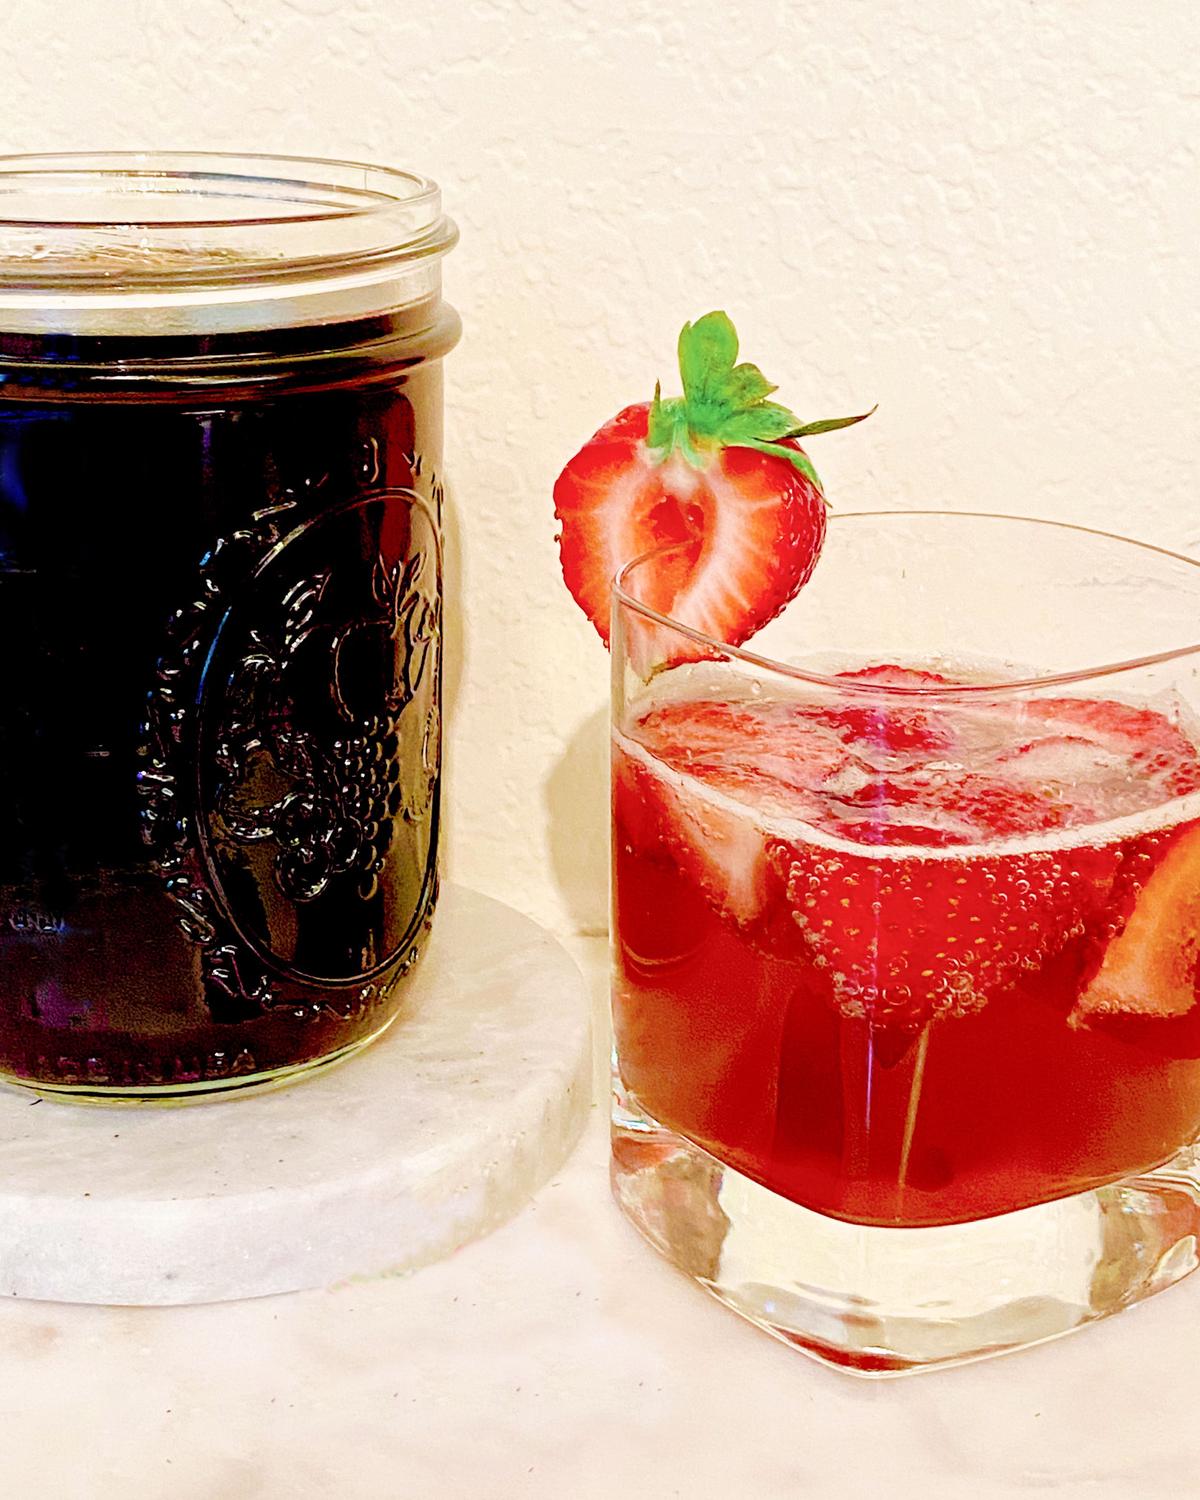 This summer refresher makes use of the season's sweet strawberries. (Lynda Balslev for Tastefood)